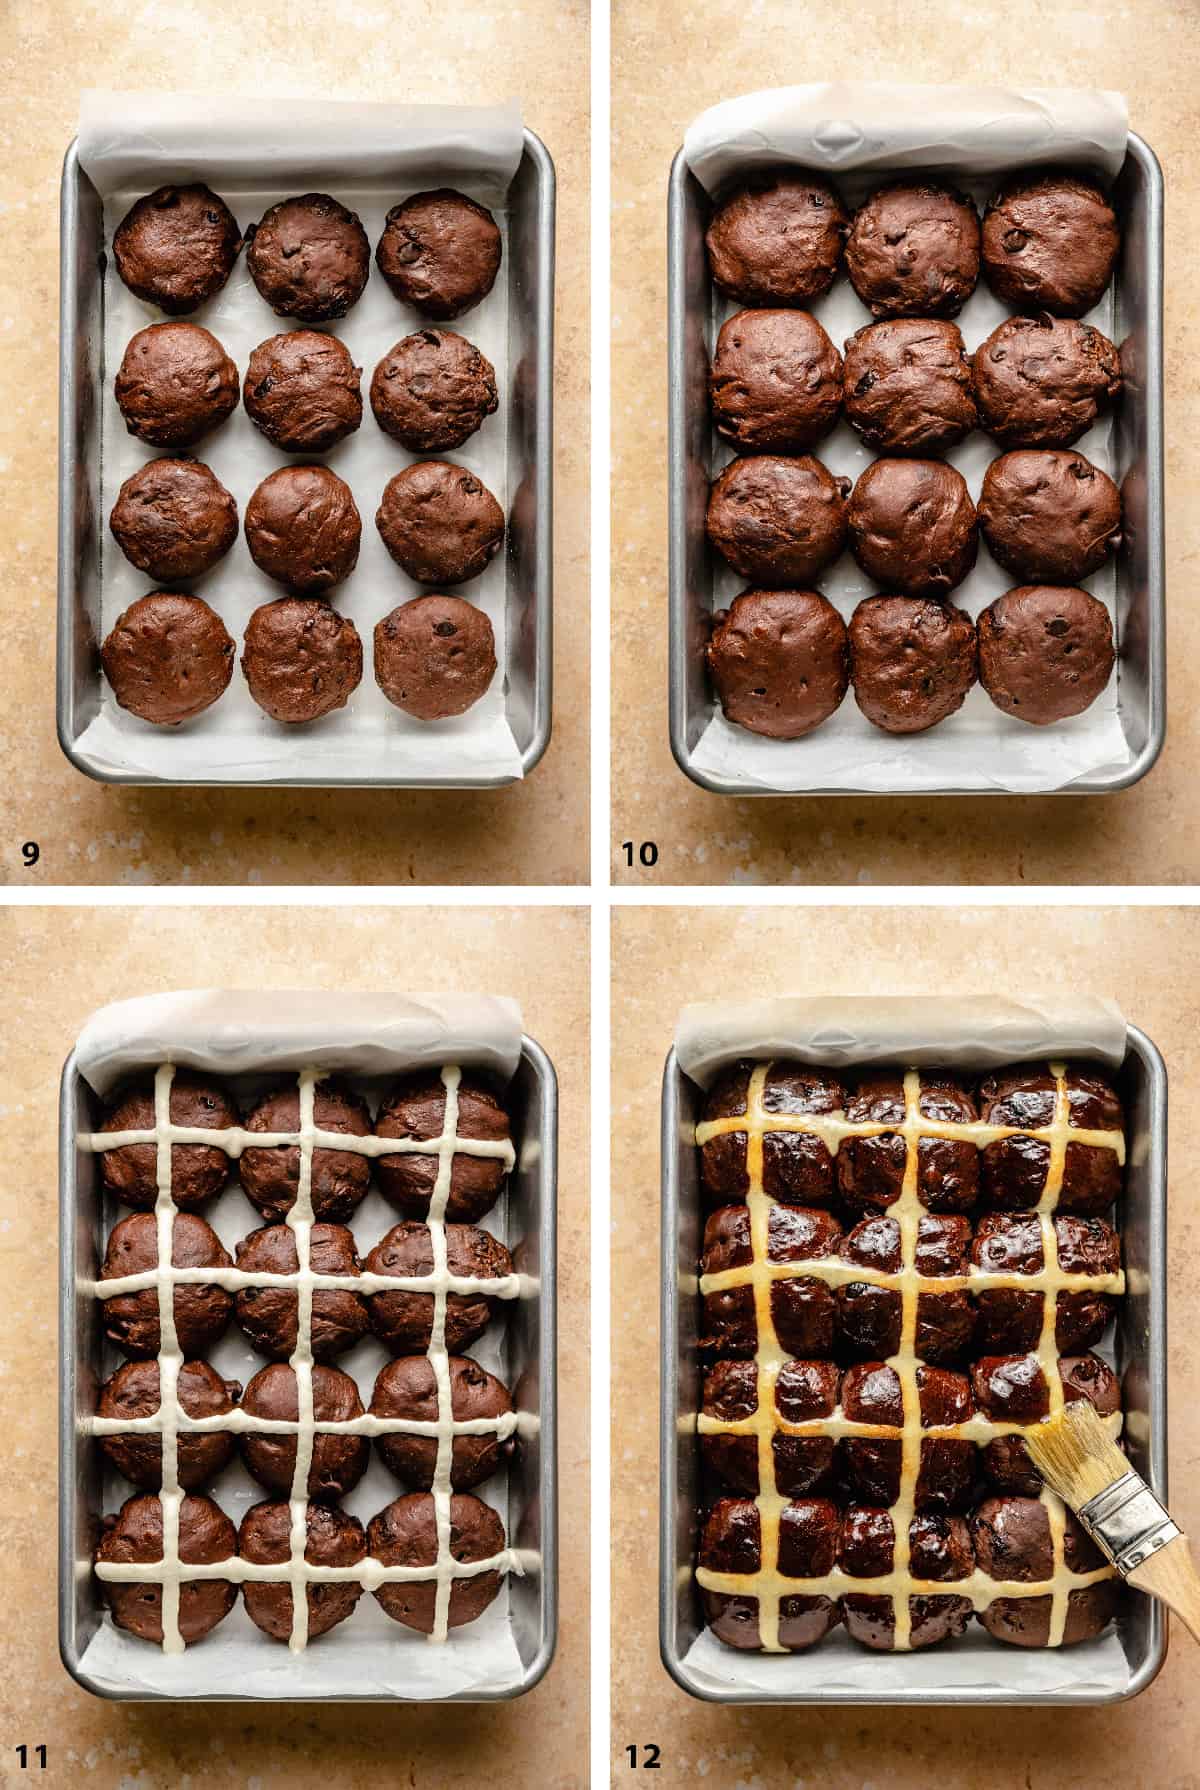 Process of proofing the chocolate hot cross buns in a baking tin, decorating and baking them.